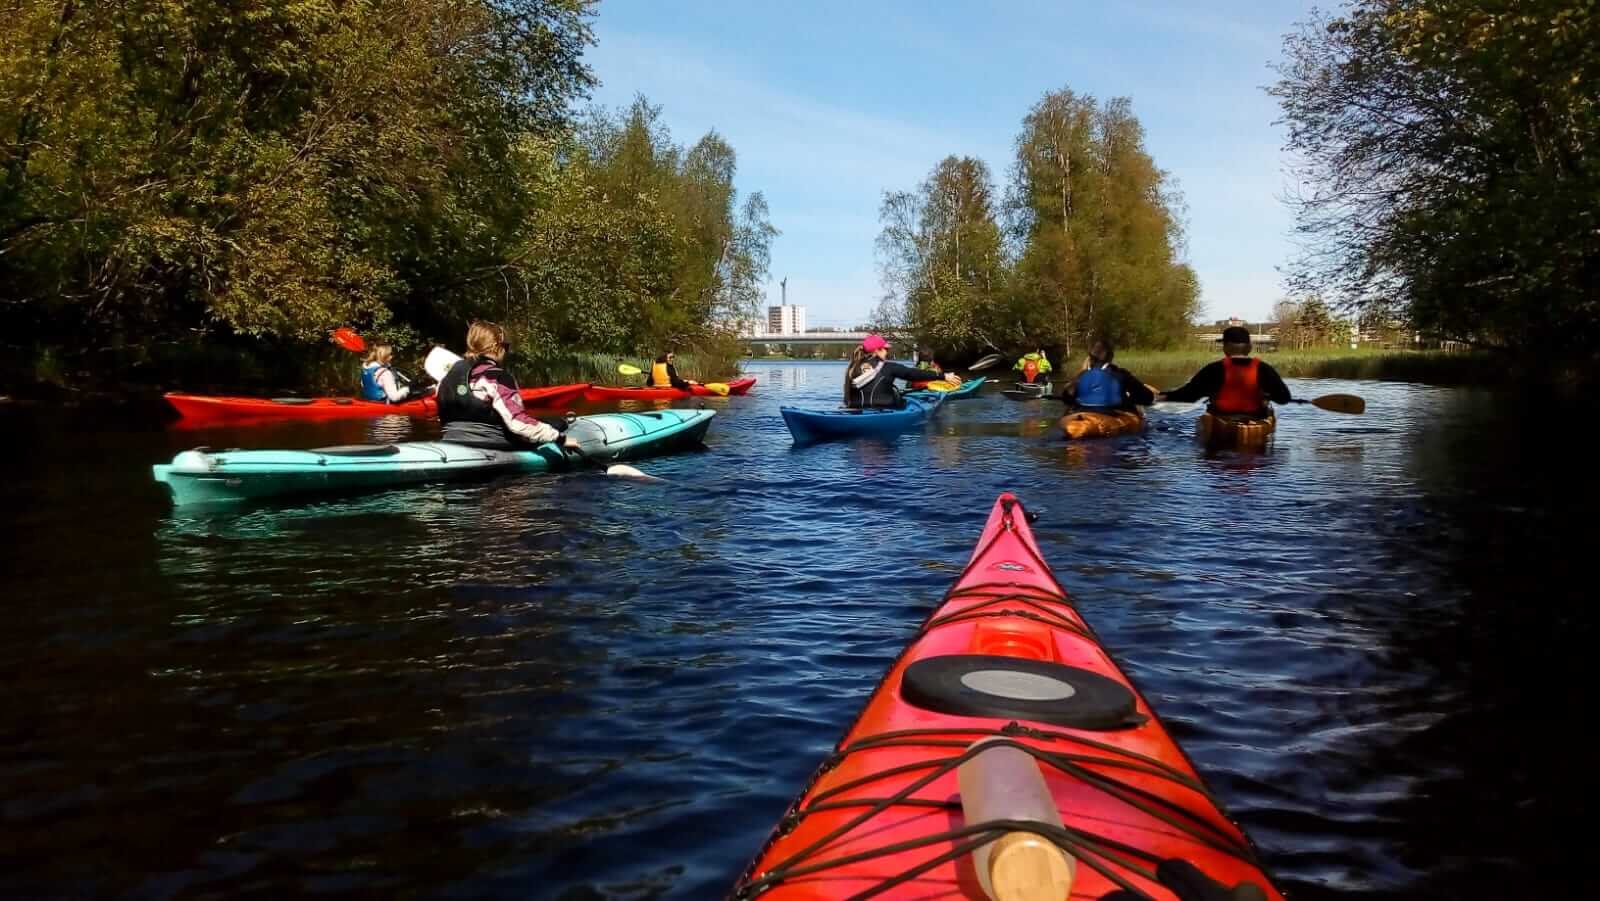 A photo taken from a red kayak which is partly showing in the bottom right corner. Eight other kayaks are in the background with people (my teammates) in them with their backs toward me. There are trees on the shores and buildings in the distant horizon.